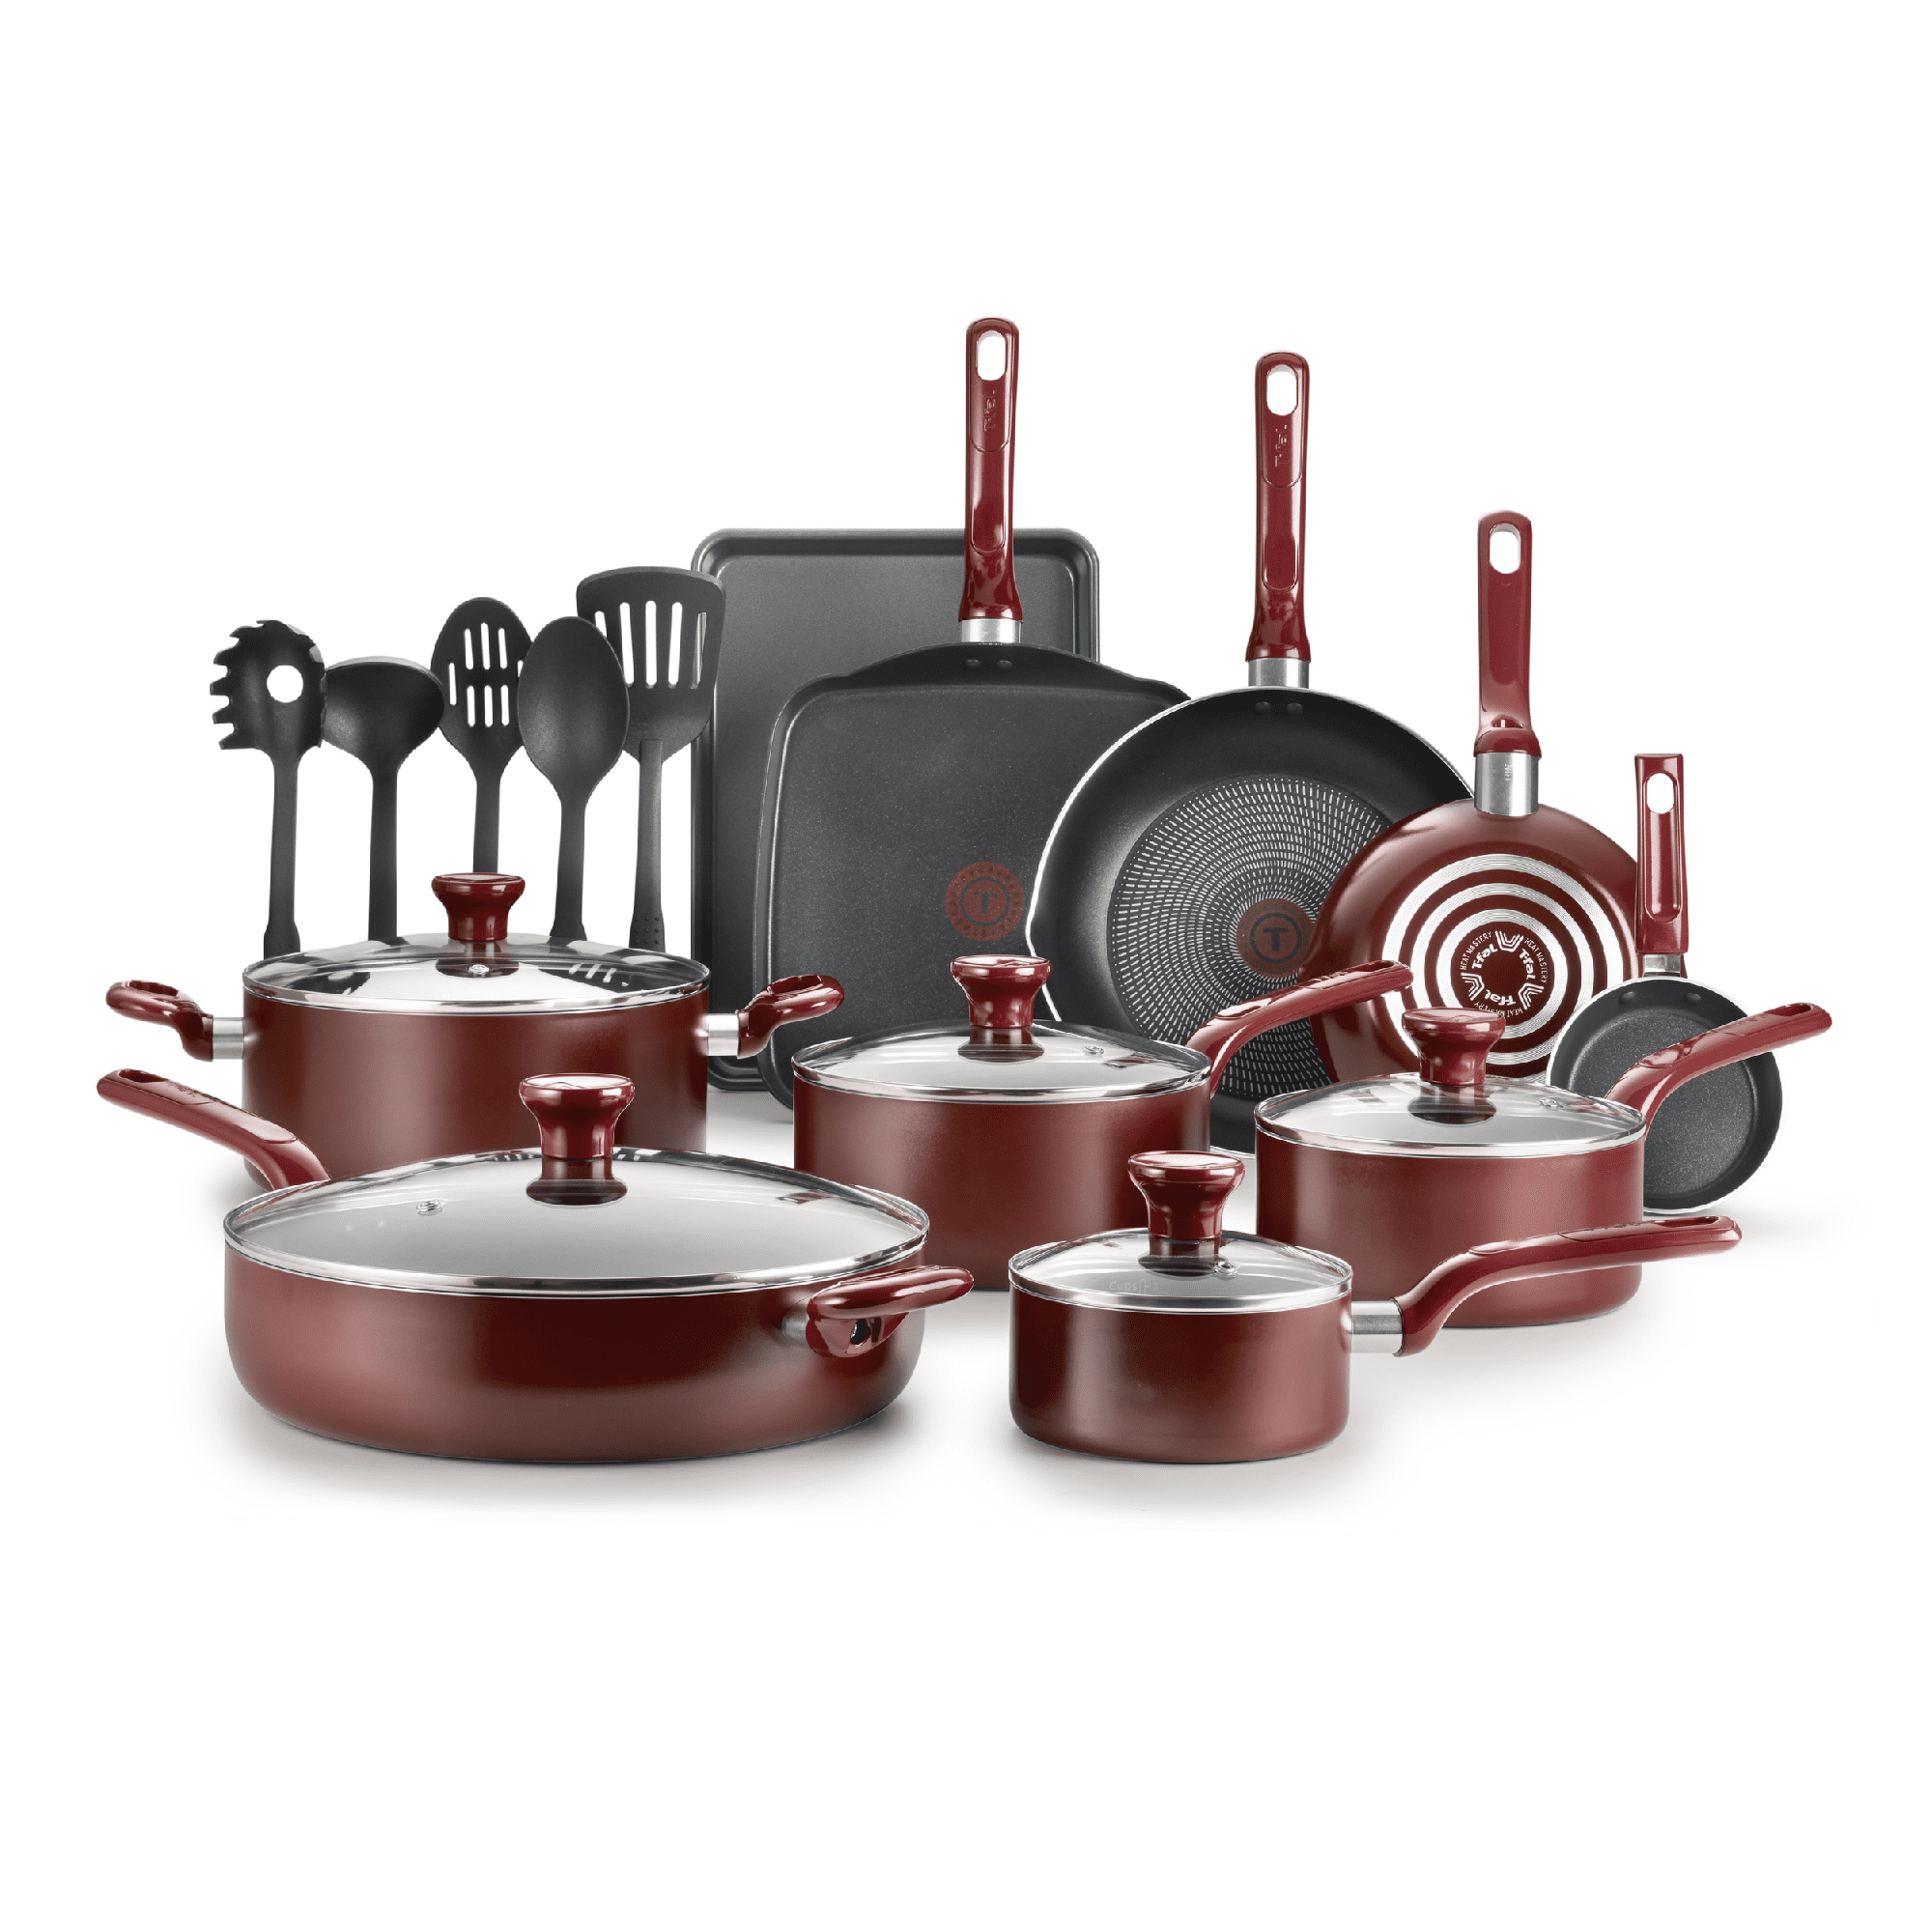 T-Fal 12-Piece Signature Cookware Set ,Red